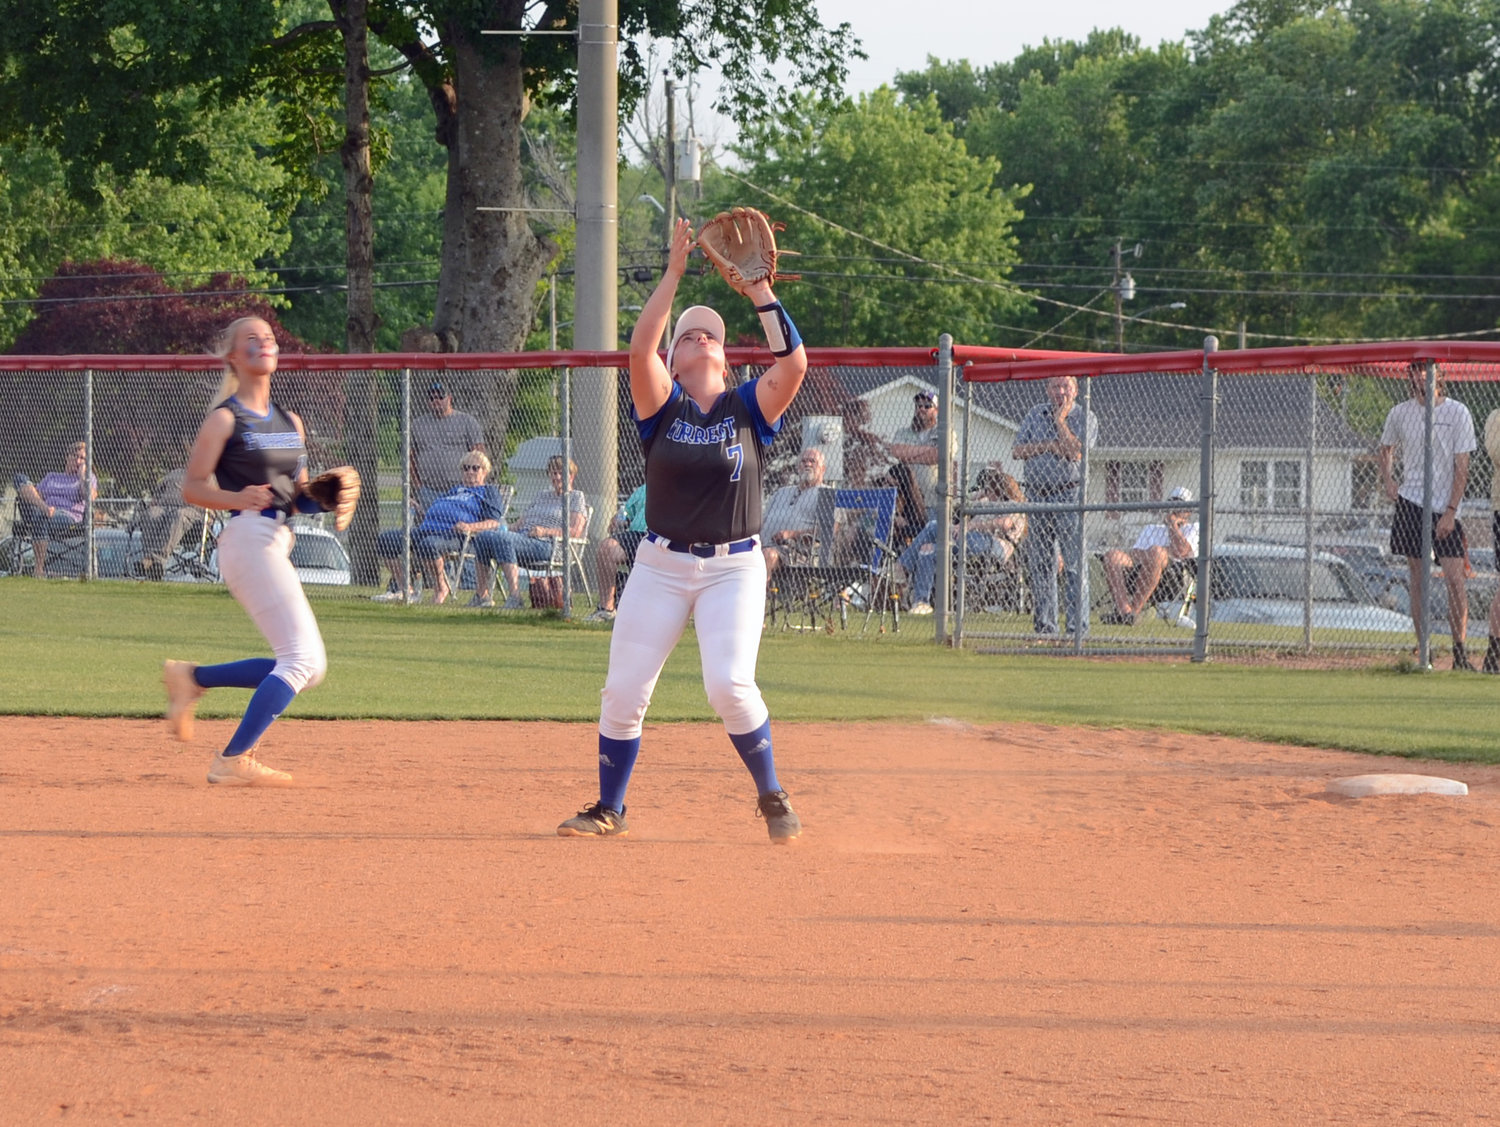 Carli Warner gets ready to catch a pop-up at first base in the third inning.